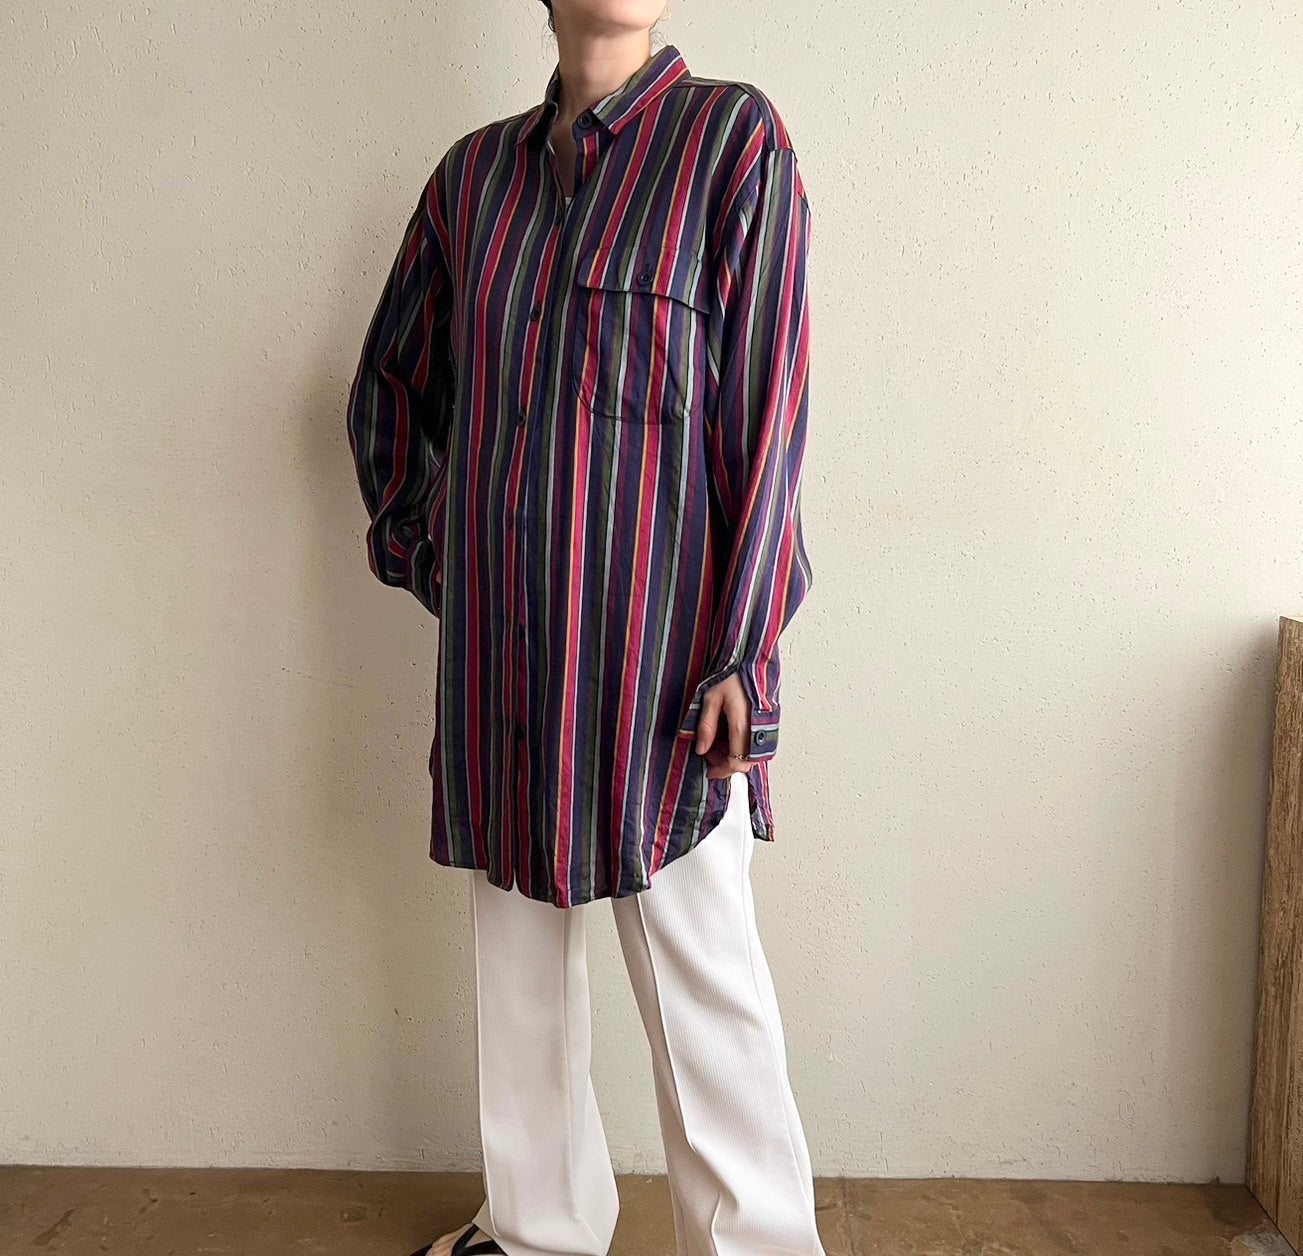 90s Striped Shirt Made in USA